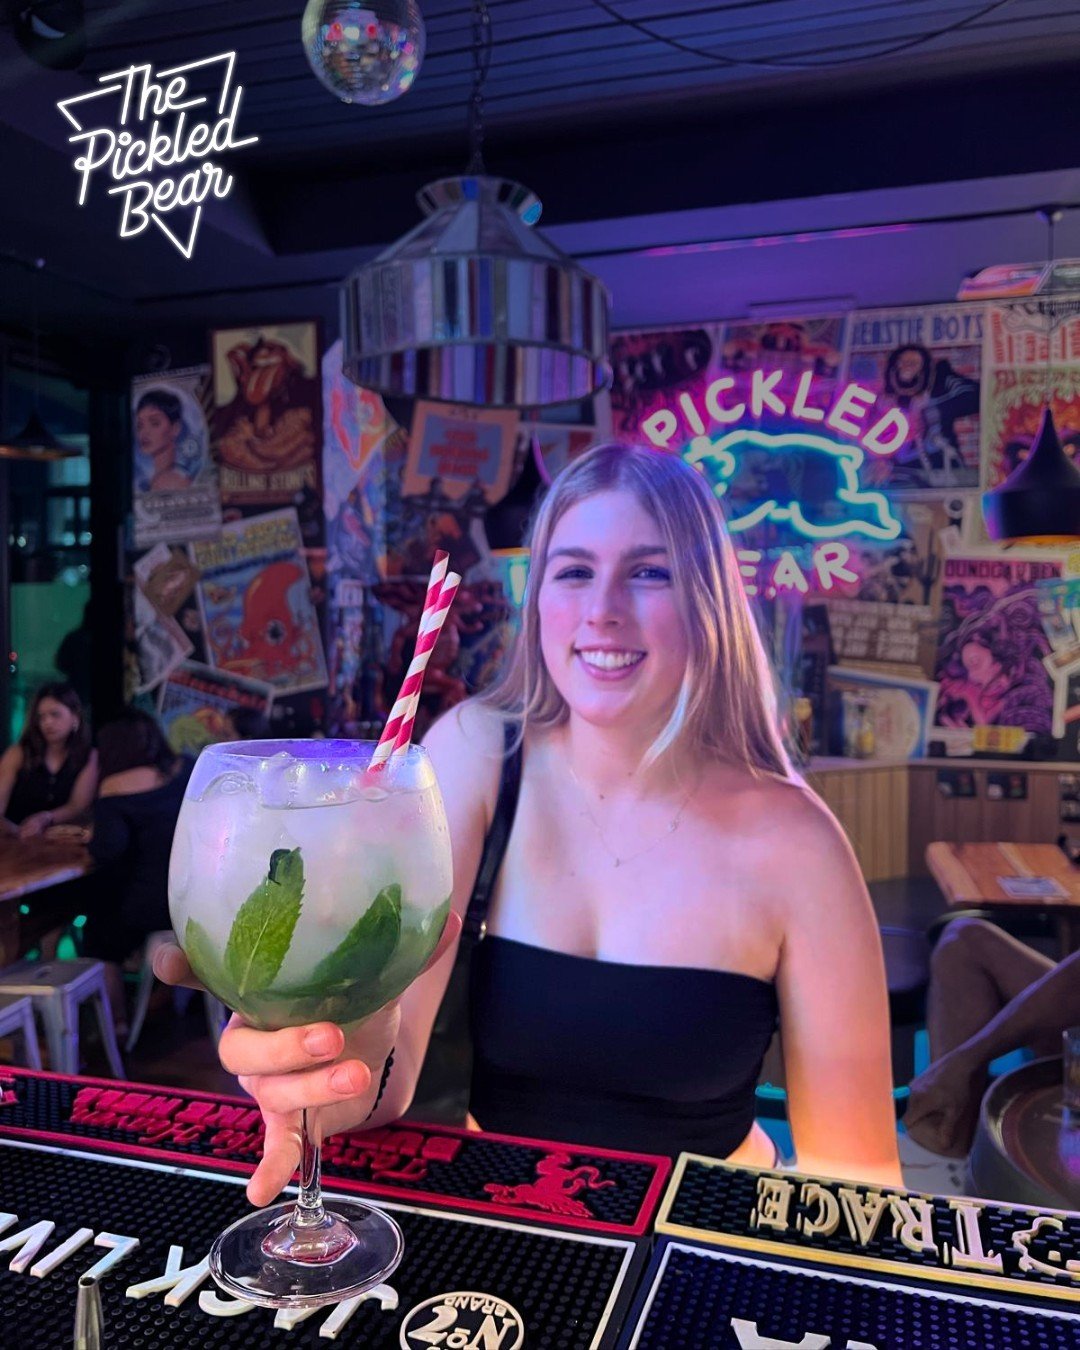 BIRTHDAY COKTAILS🍹✨🥂

Thinking about visiting The Pickled on your birthday? We hope this massive birthday mojito is enough to convince you 🎉

Show us your ID to prove it's your birthday week 😉

Book a table ▶️ Link in Bio